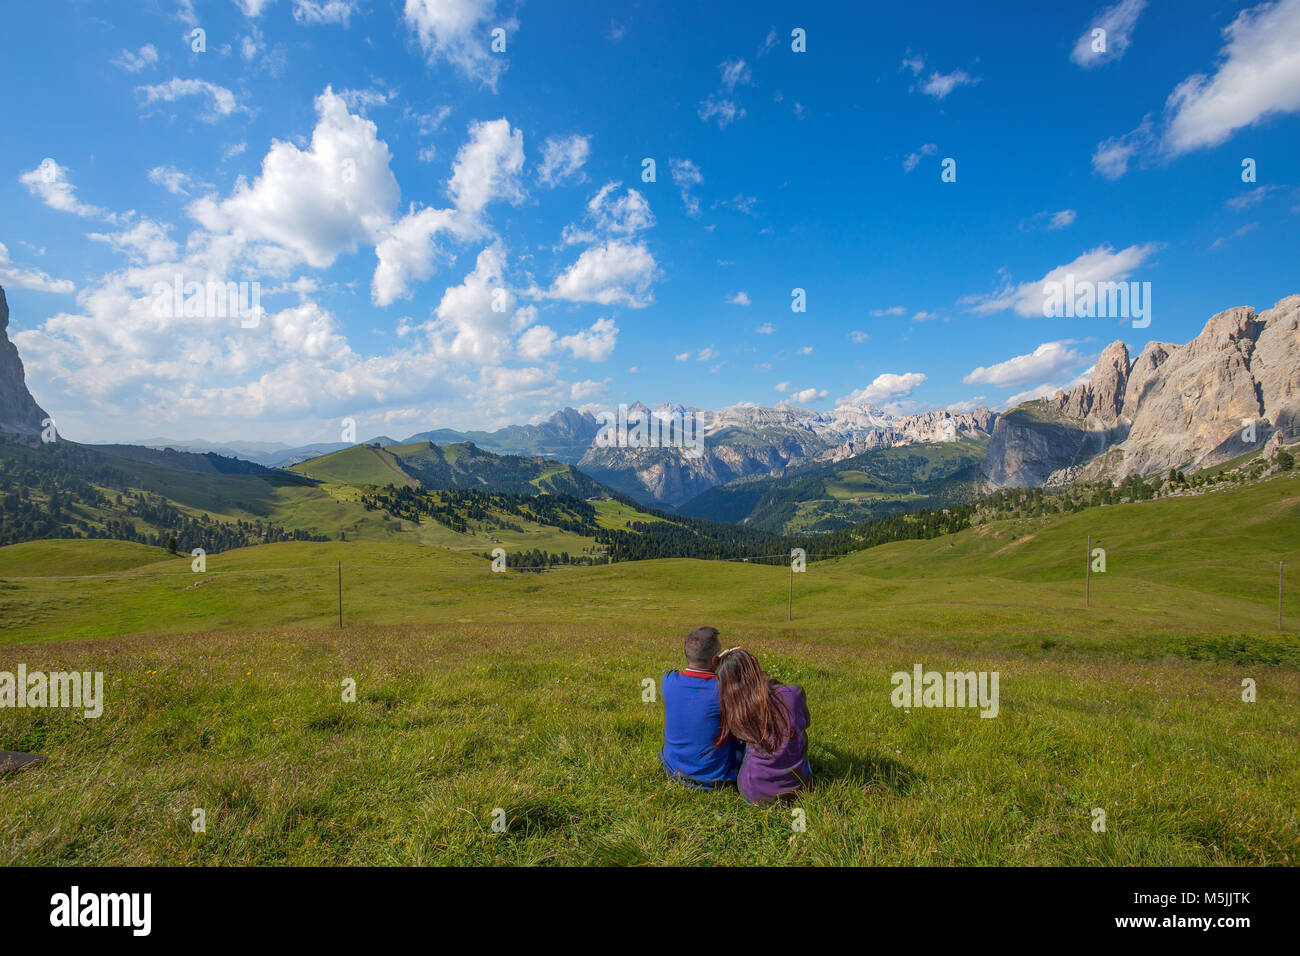 Couple looking at a mountain panorama Stock Photo